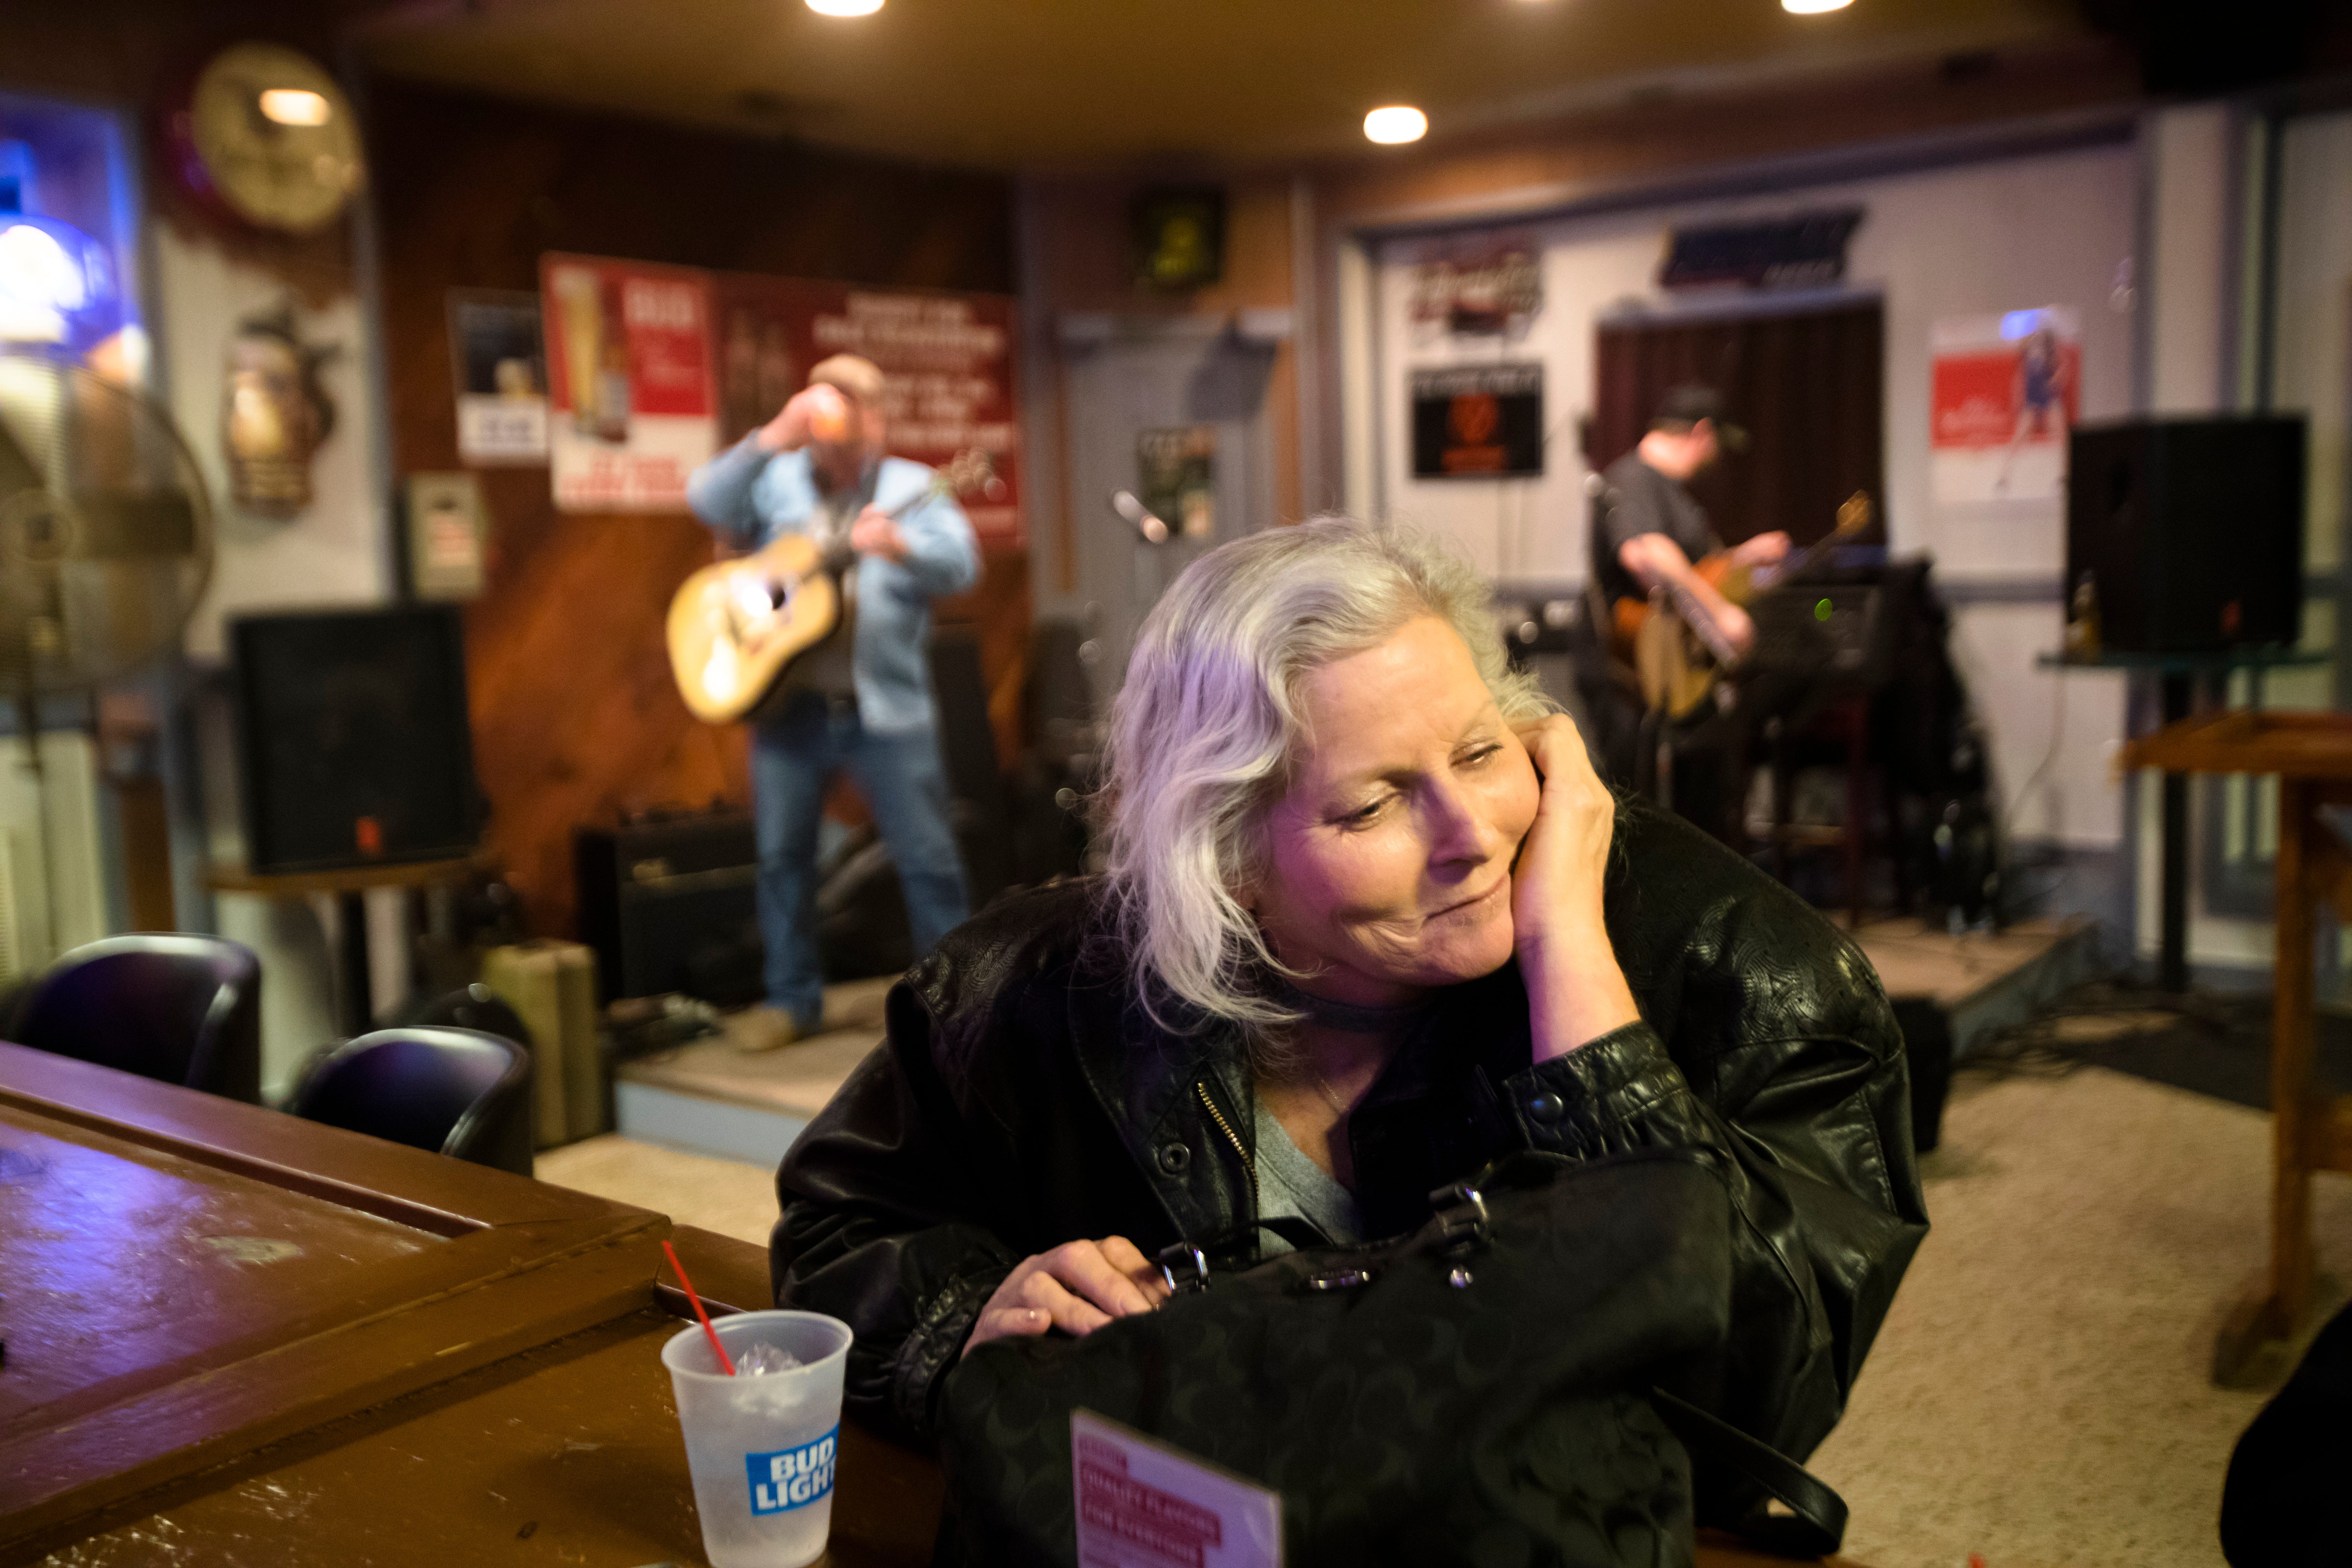 Kathy Stevens listens to music while attending a benefit for her at Hillbilly Heaven in Middletown. Stevens has suffered from breast cancer and ovarian cancer. She now battles liver disease.